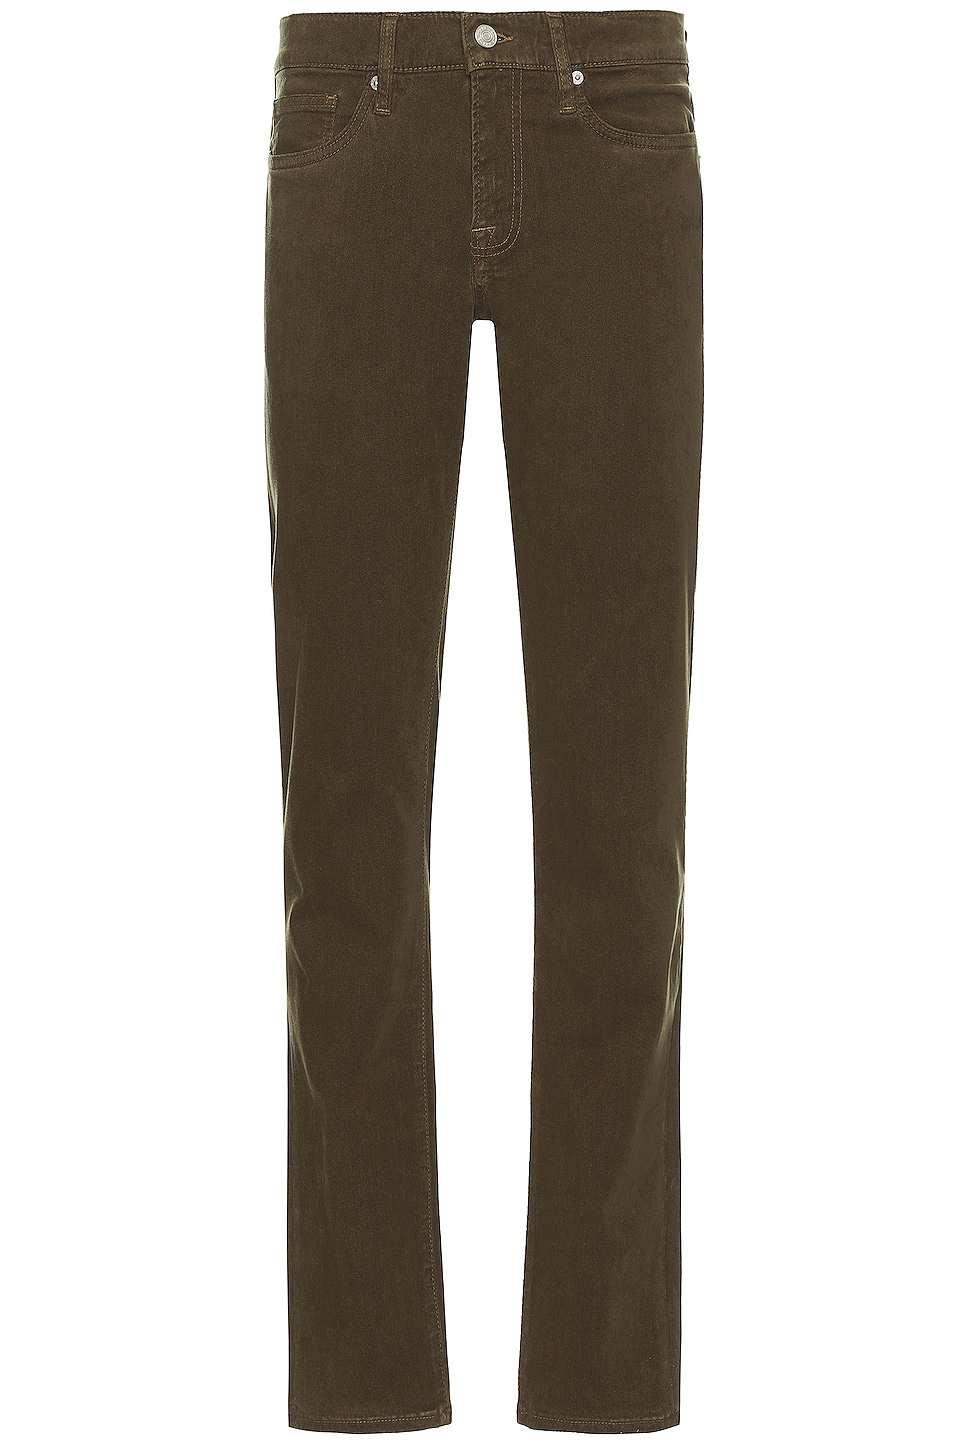 Image 1 of FRAME L'homme Slim Jean in Military Green